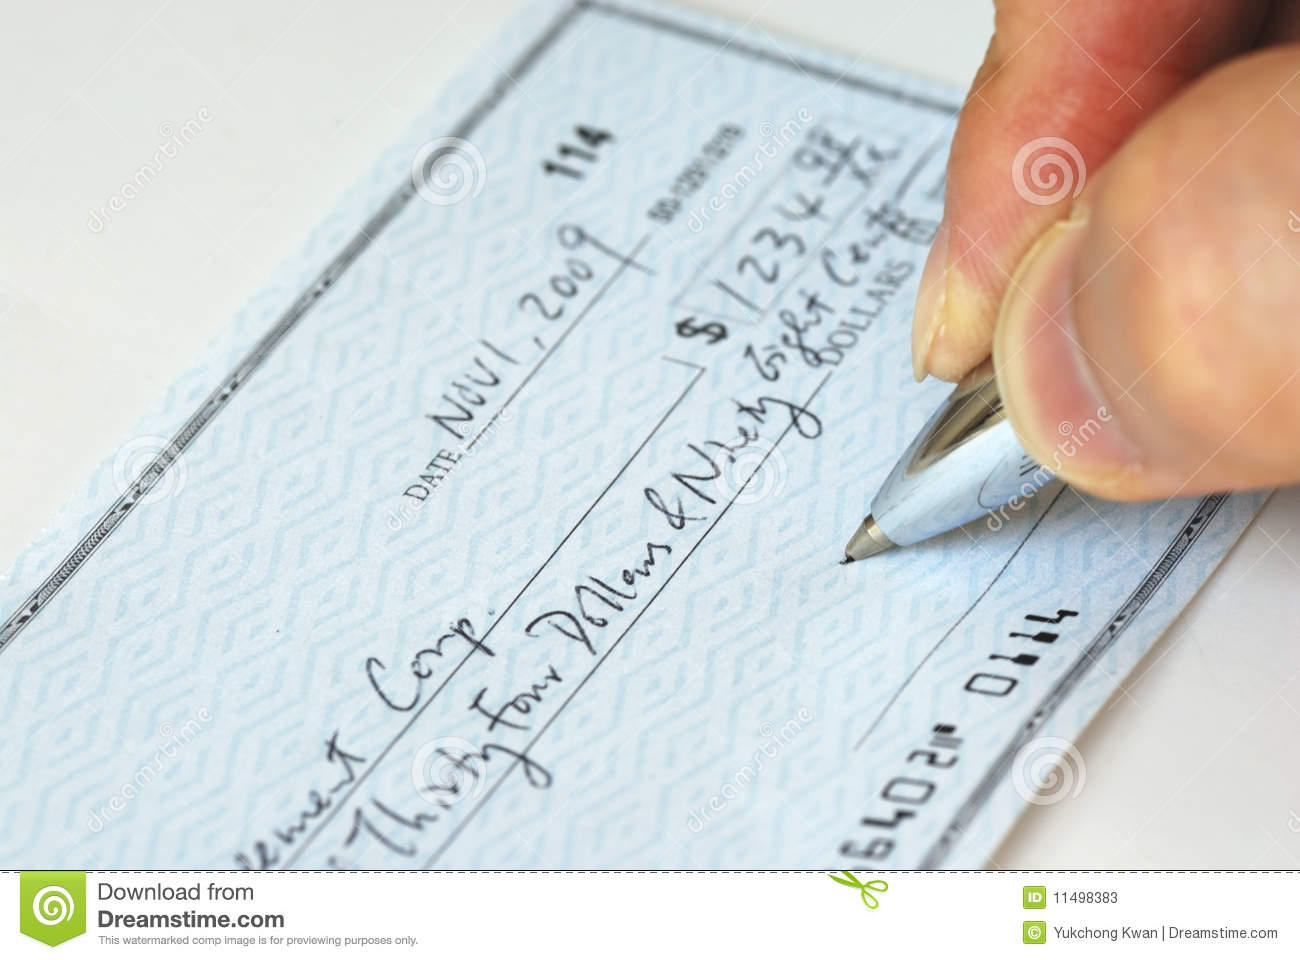 Writing A Check To Pay Bill Stock Photos   Image  11498383